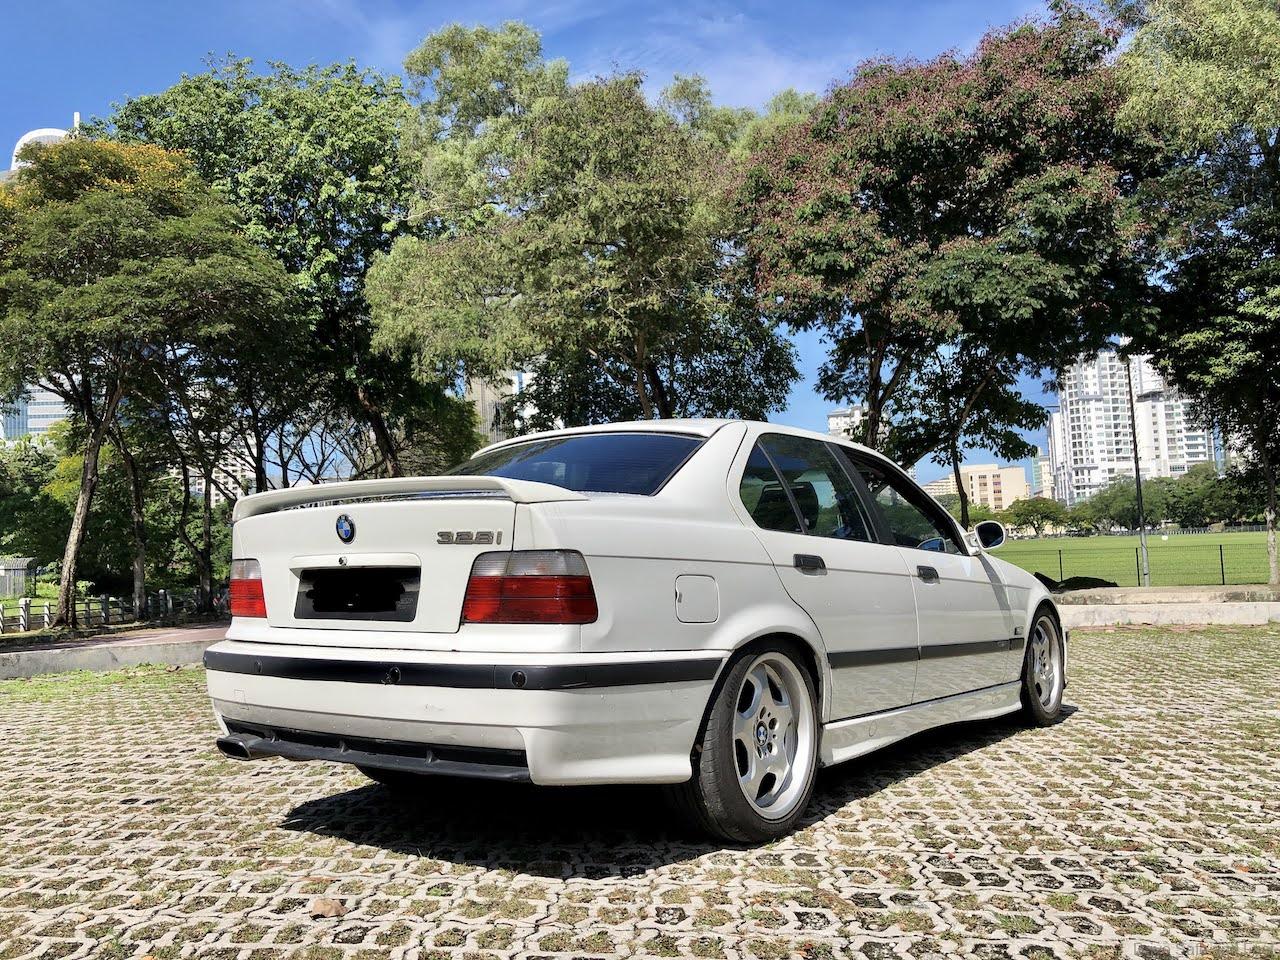 https://www.dsf.my/wp-content/uploads/2021/09/BMW-E36-Used_1996__24021.jpg?v=1632183402